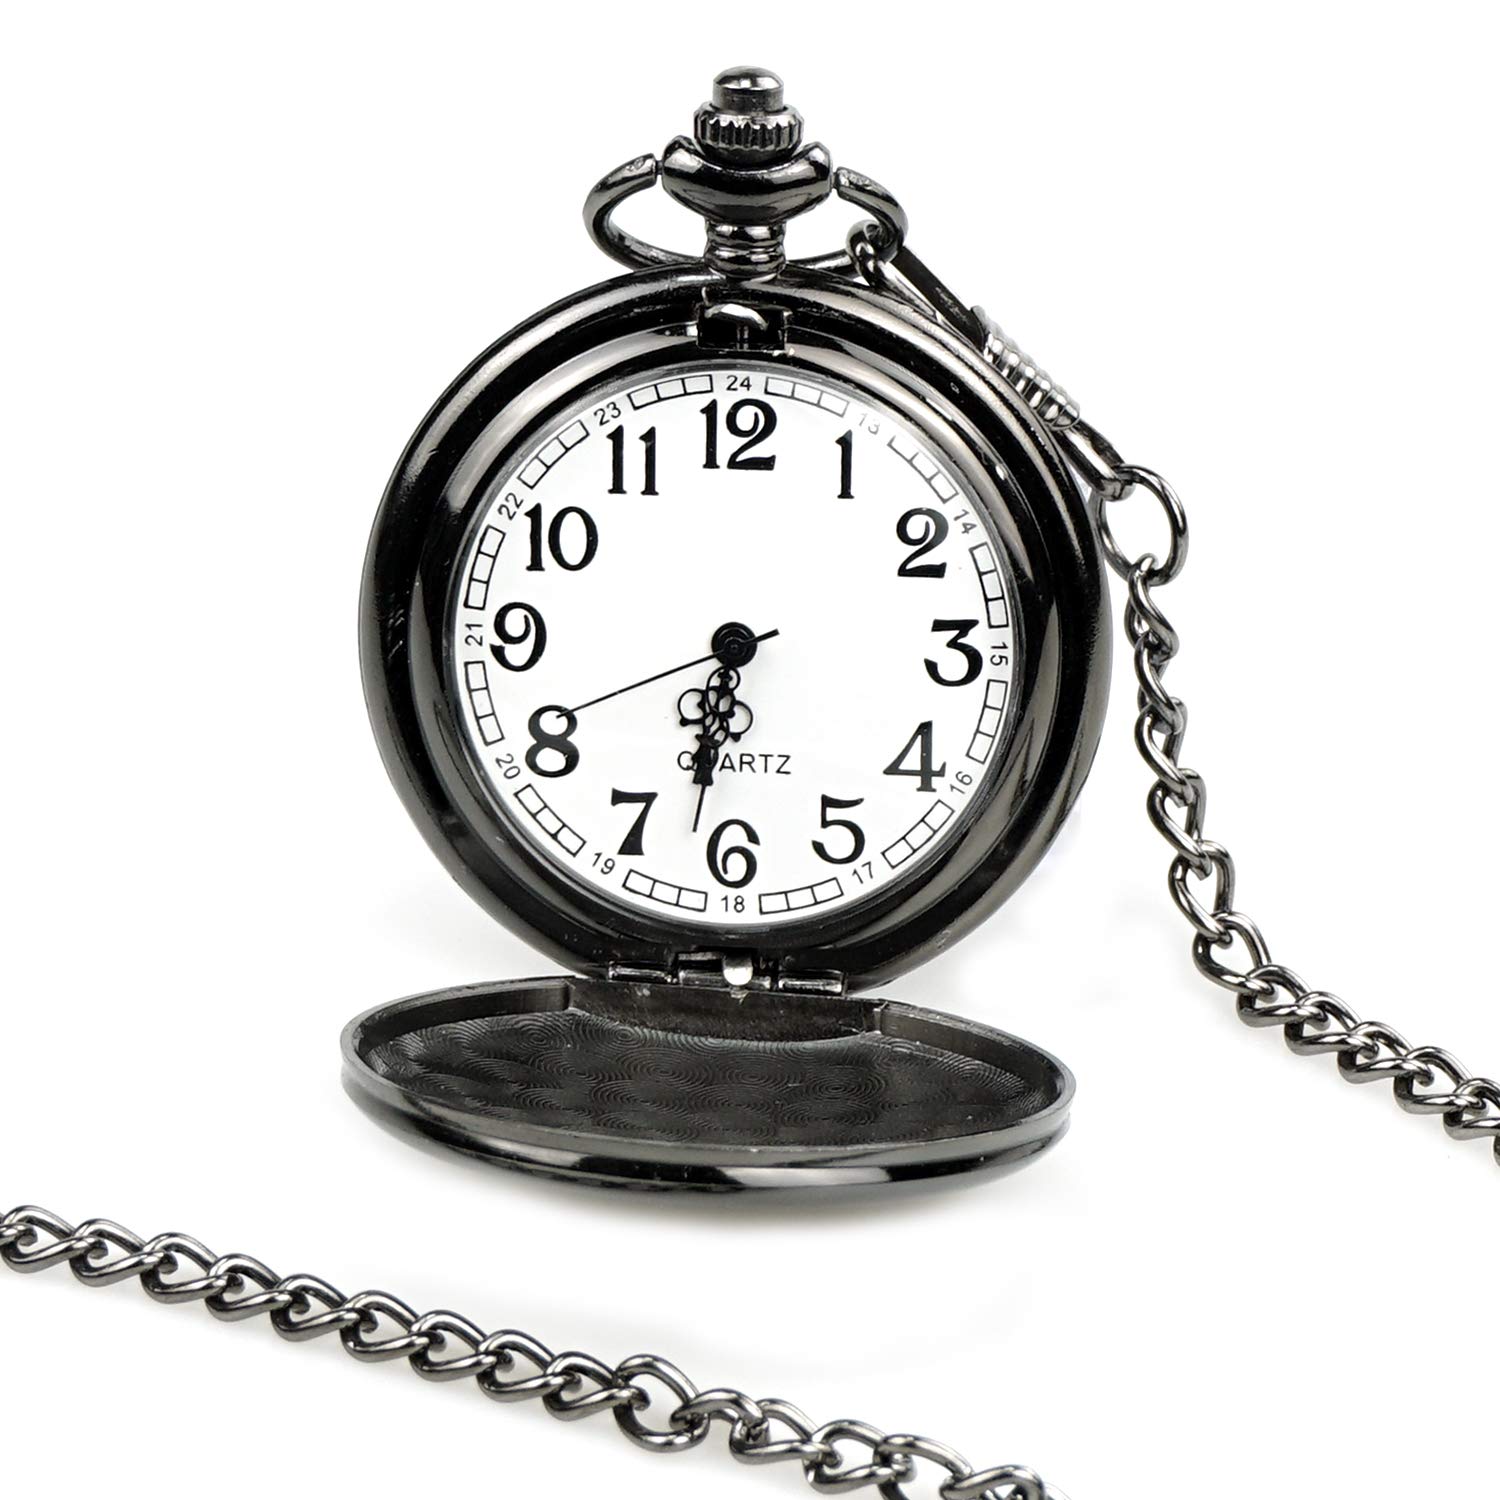 FUNGORGT Pocket Watch for Men Vintage Quartz Engraved Pocket Watch for Dad with Chain & Dad Christmas Birthday Christmas Gifts